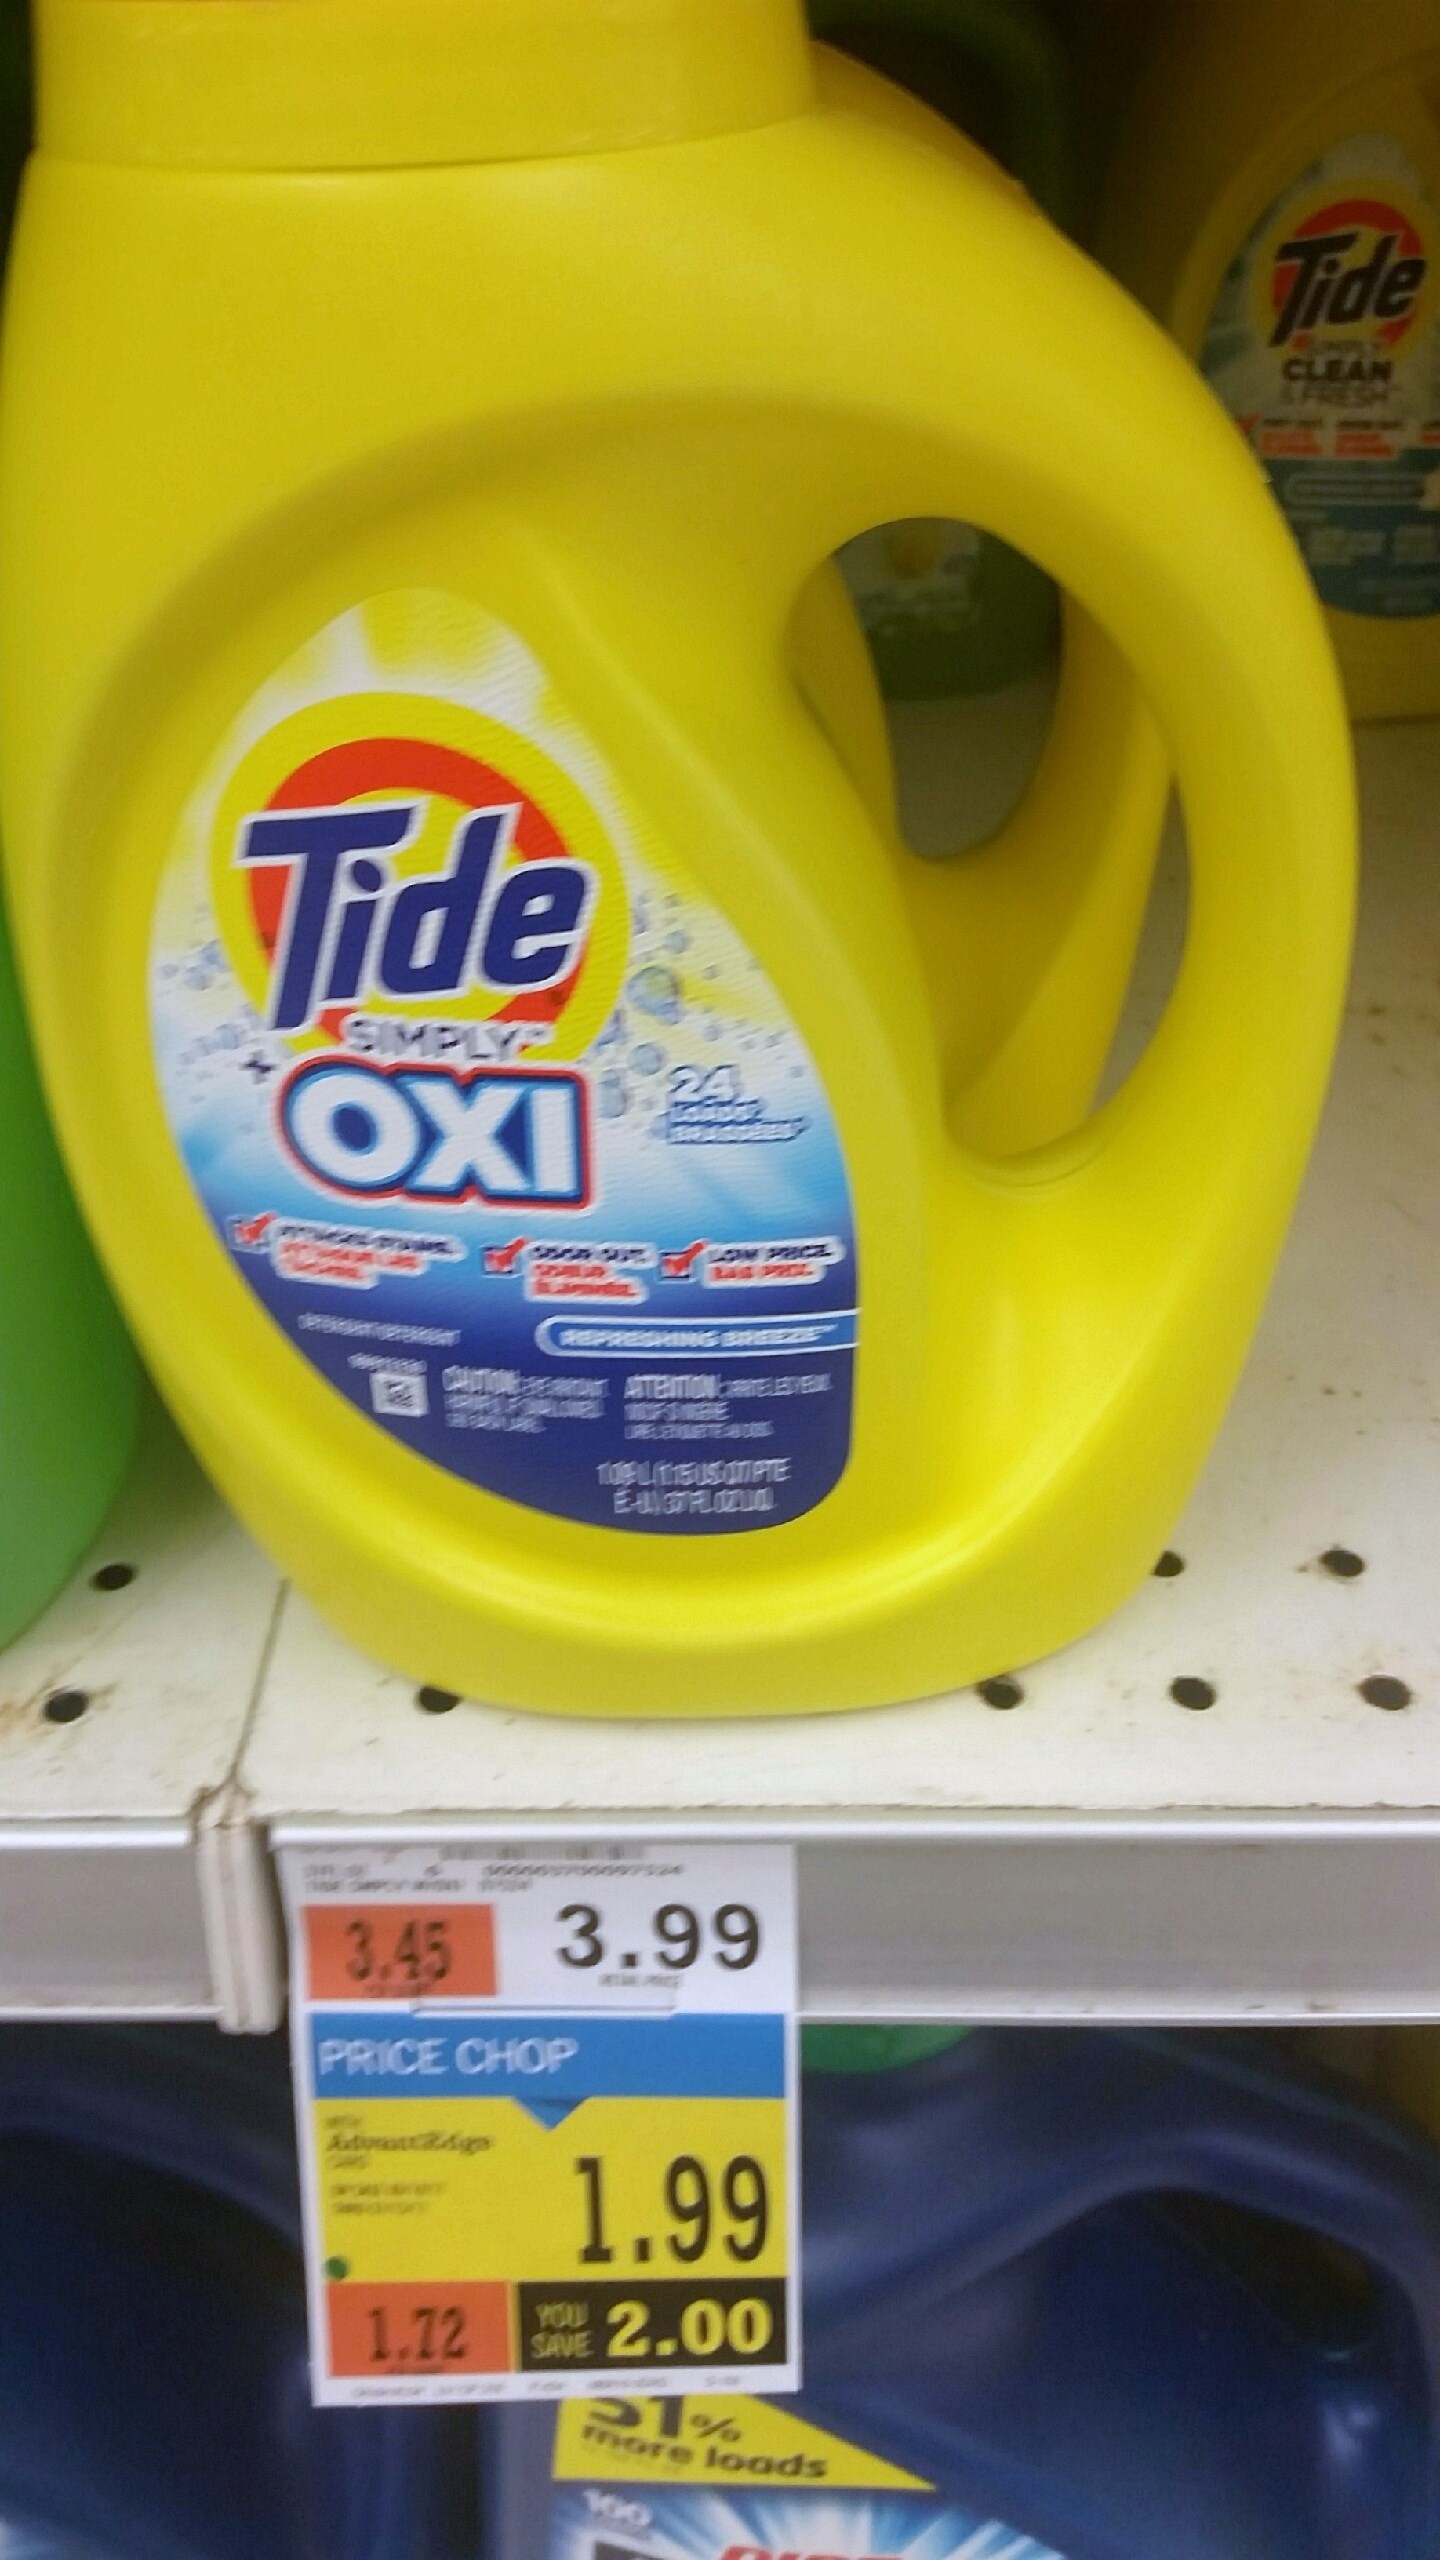 Free Tide Simply Oxi Detergent At Price Chopper!!! - My Momma Taught Me - Free Printable Tide Simply Coupons